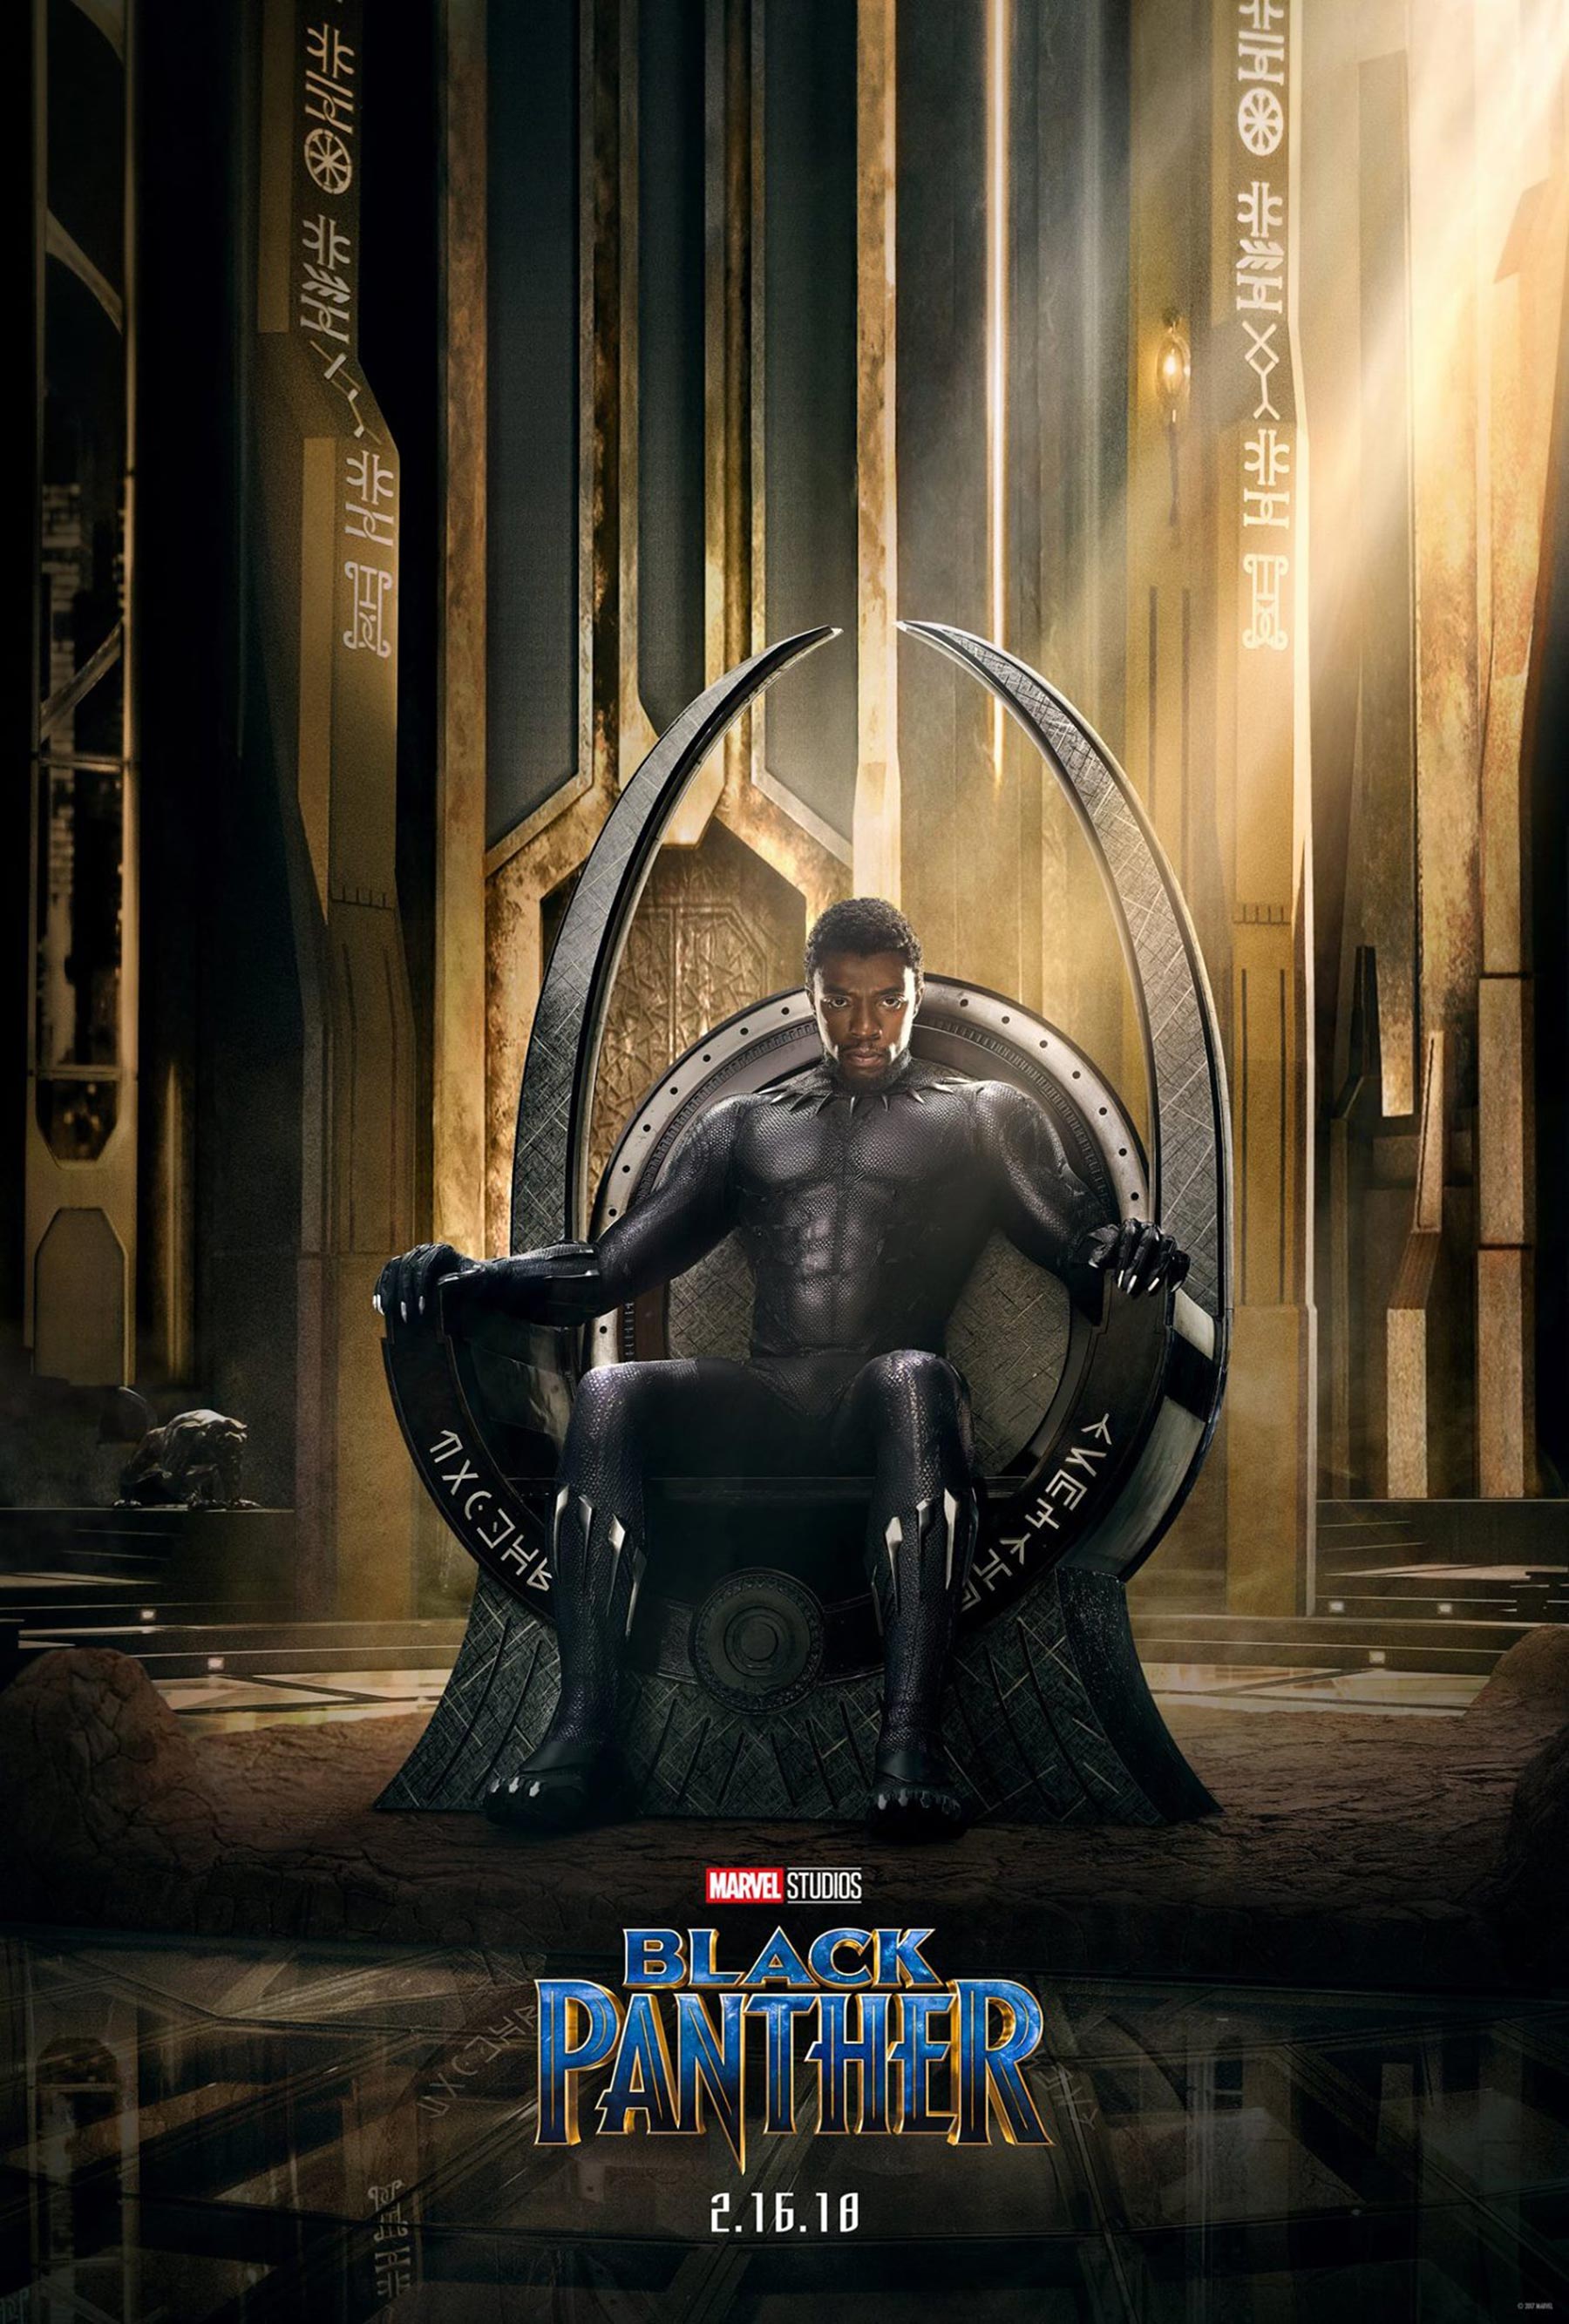 New 'Black Panther' Poster Hints At Trailer Tonight
